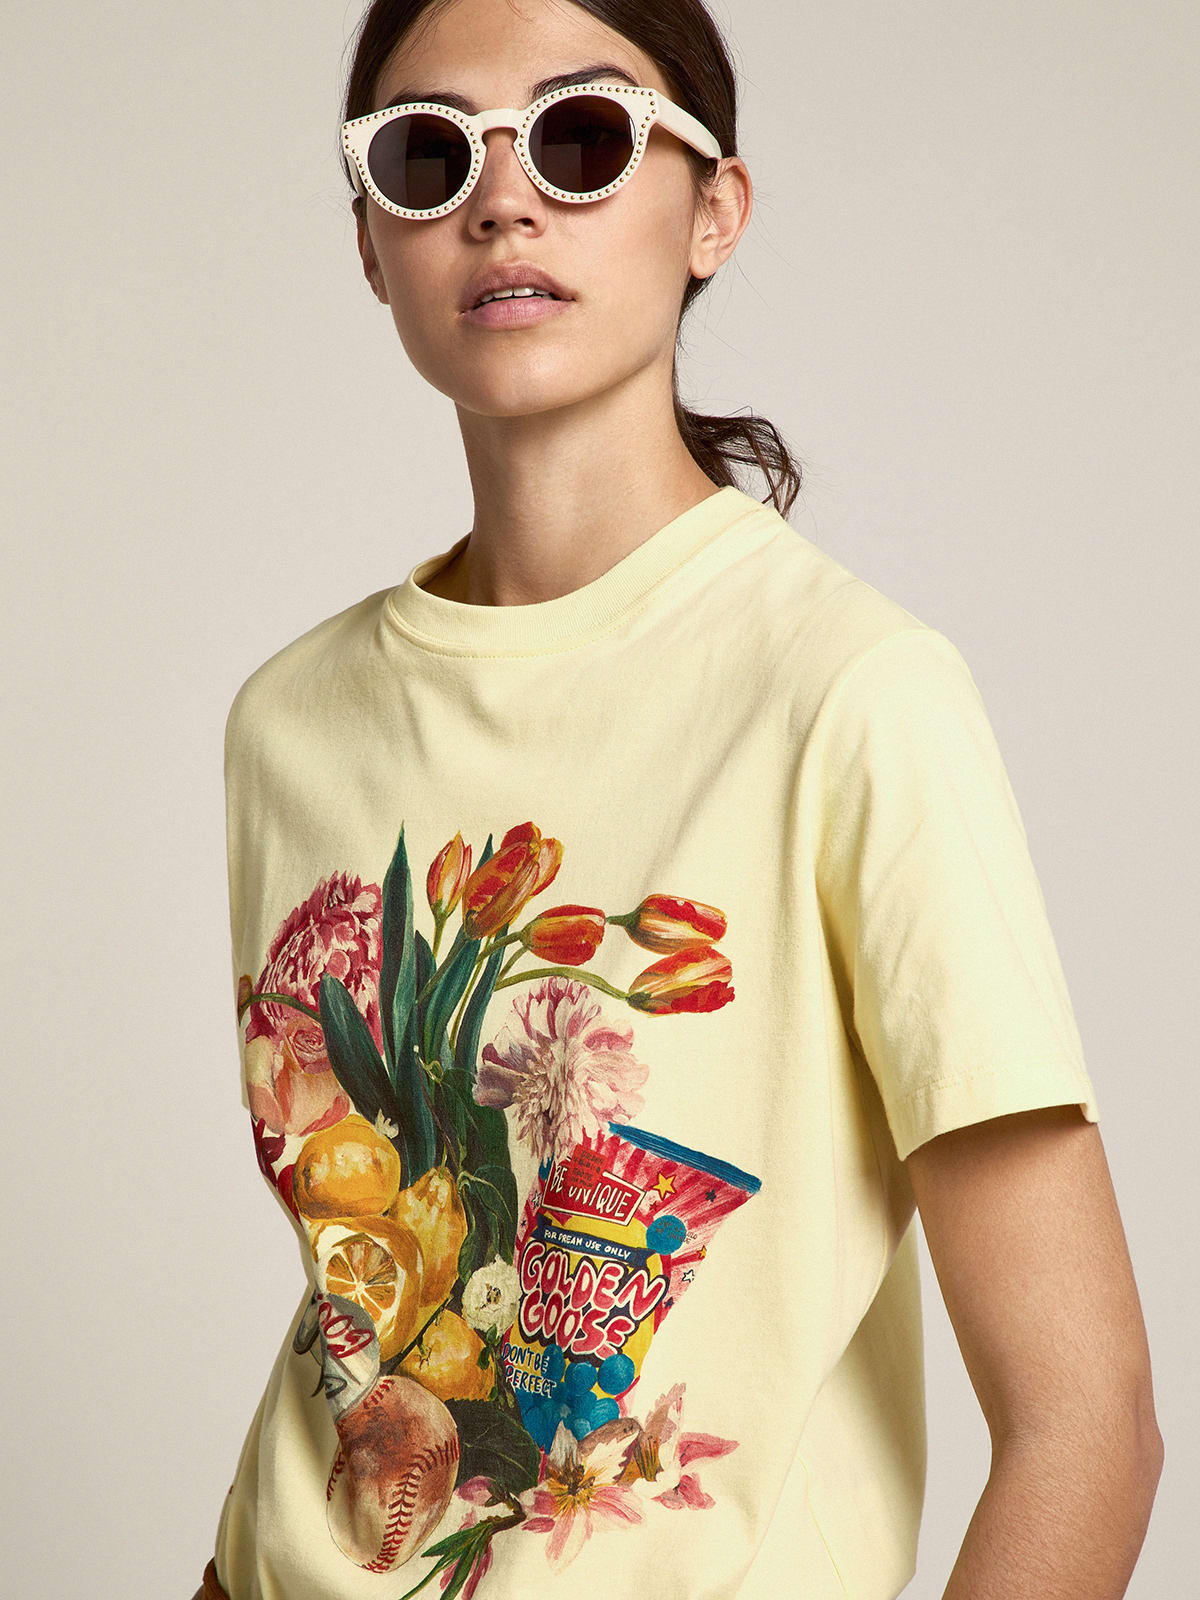 Pastel yellow T-shirt with colorful collage-style print